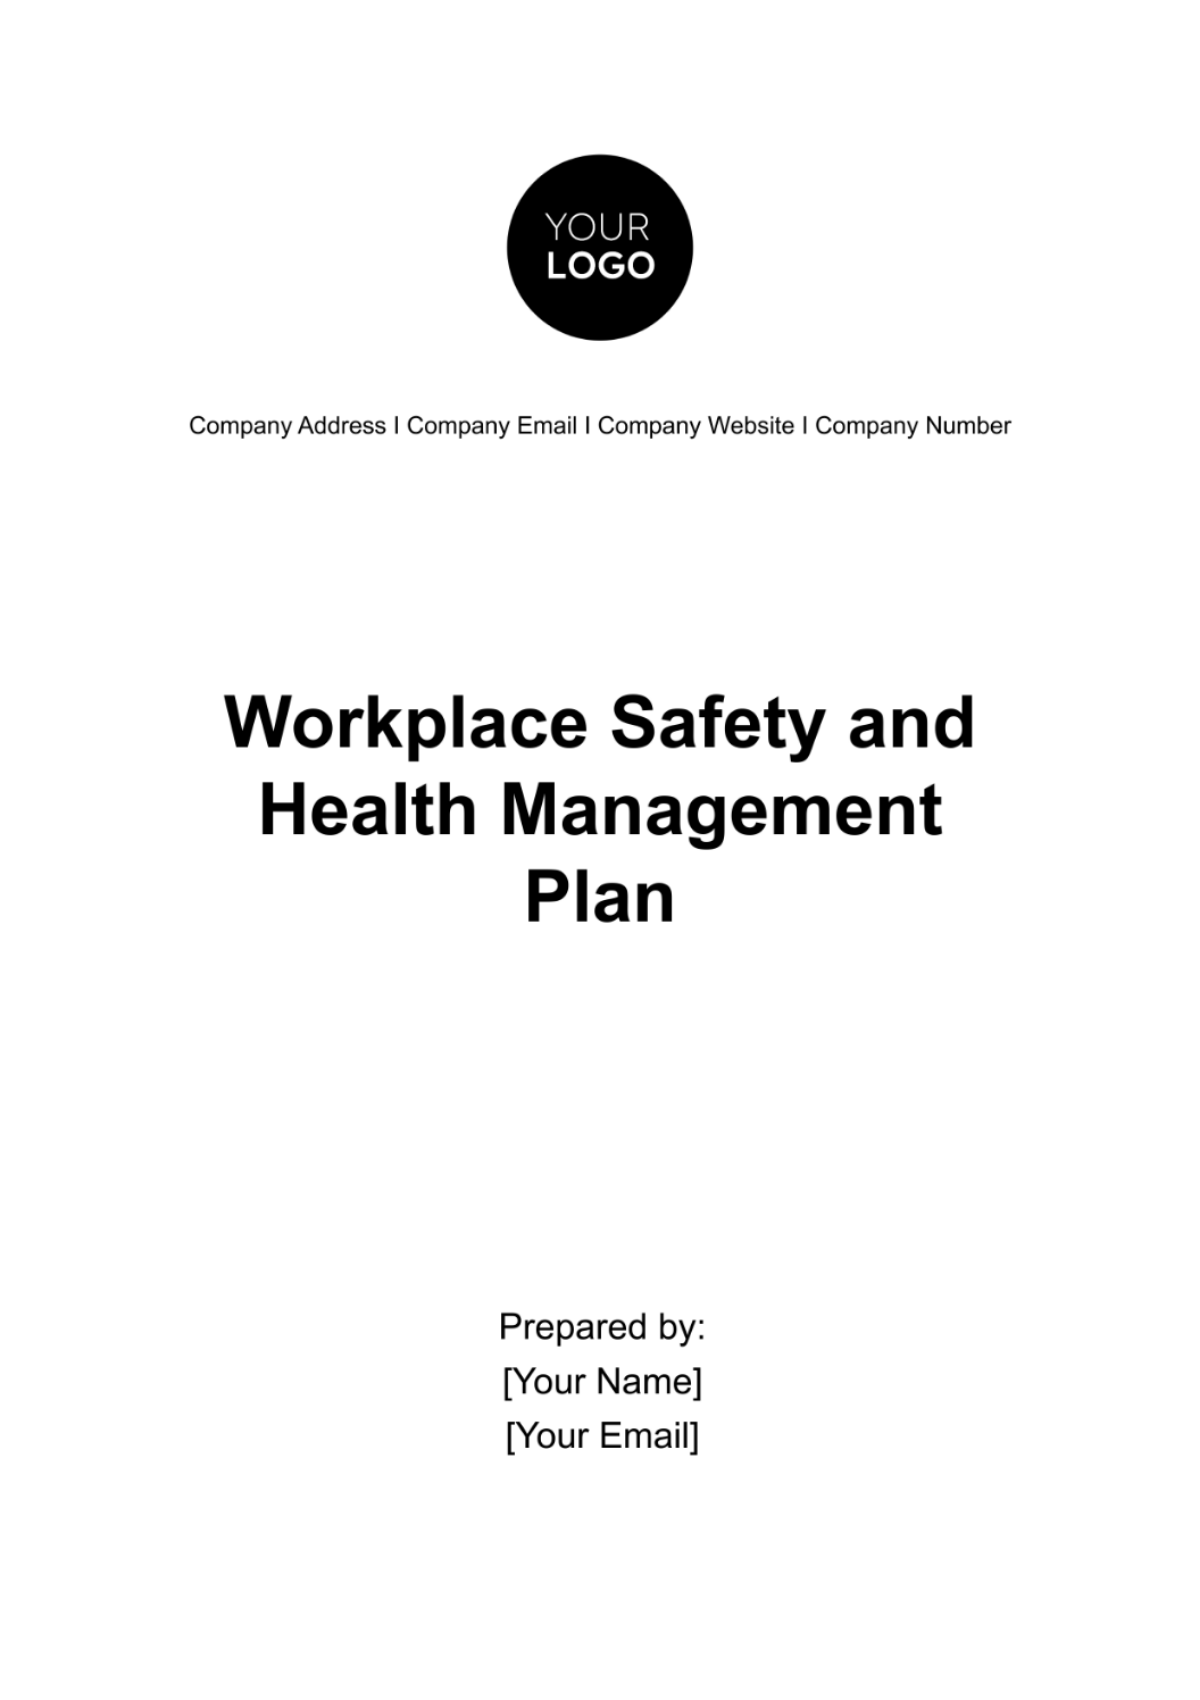 Free Workplace Safety and Health Management Plan Template